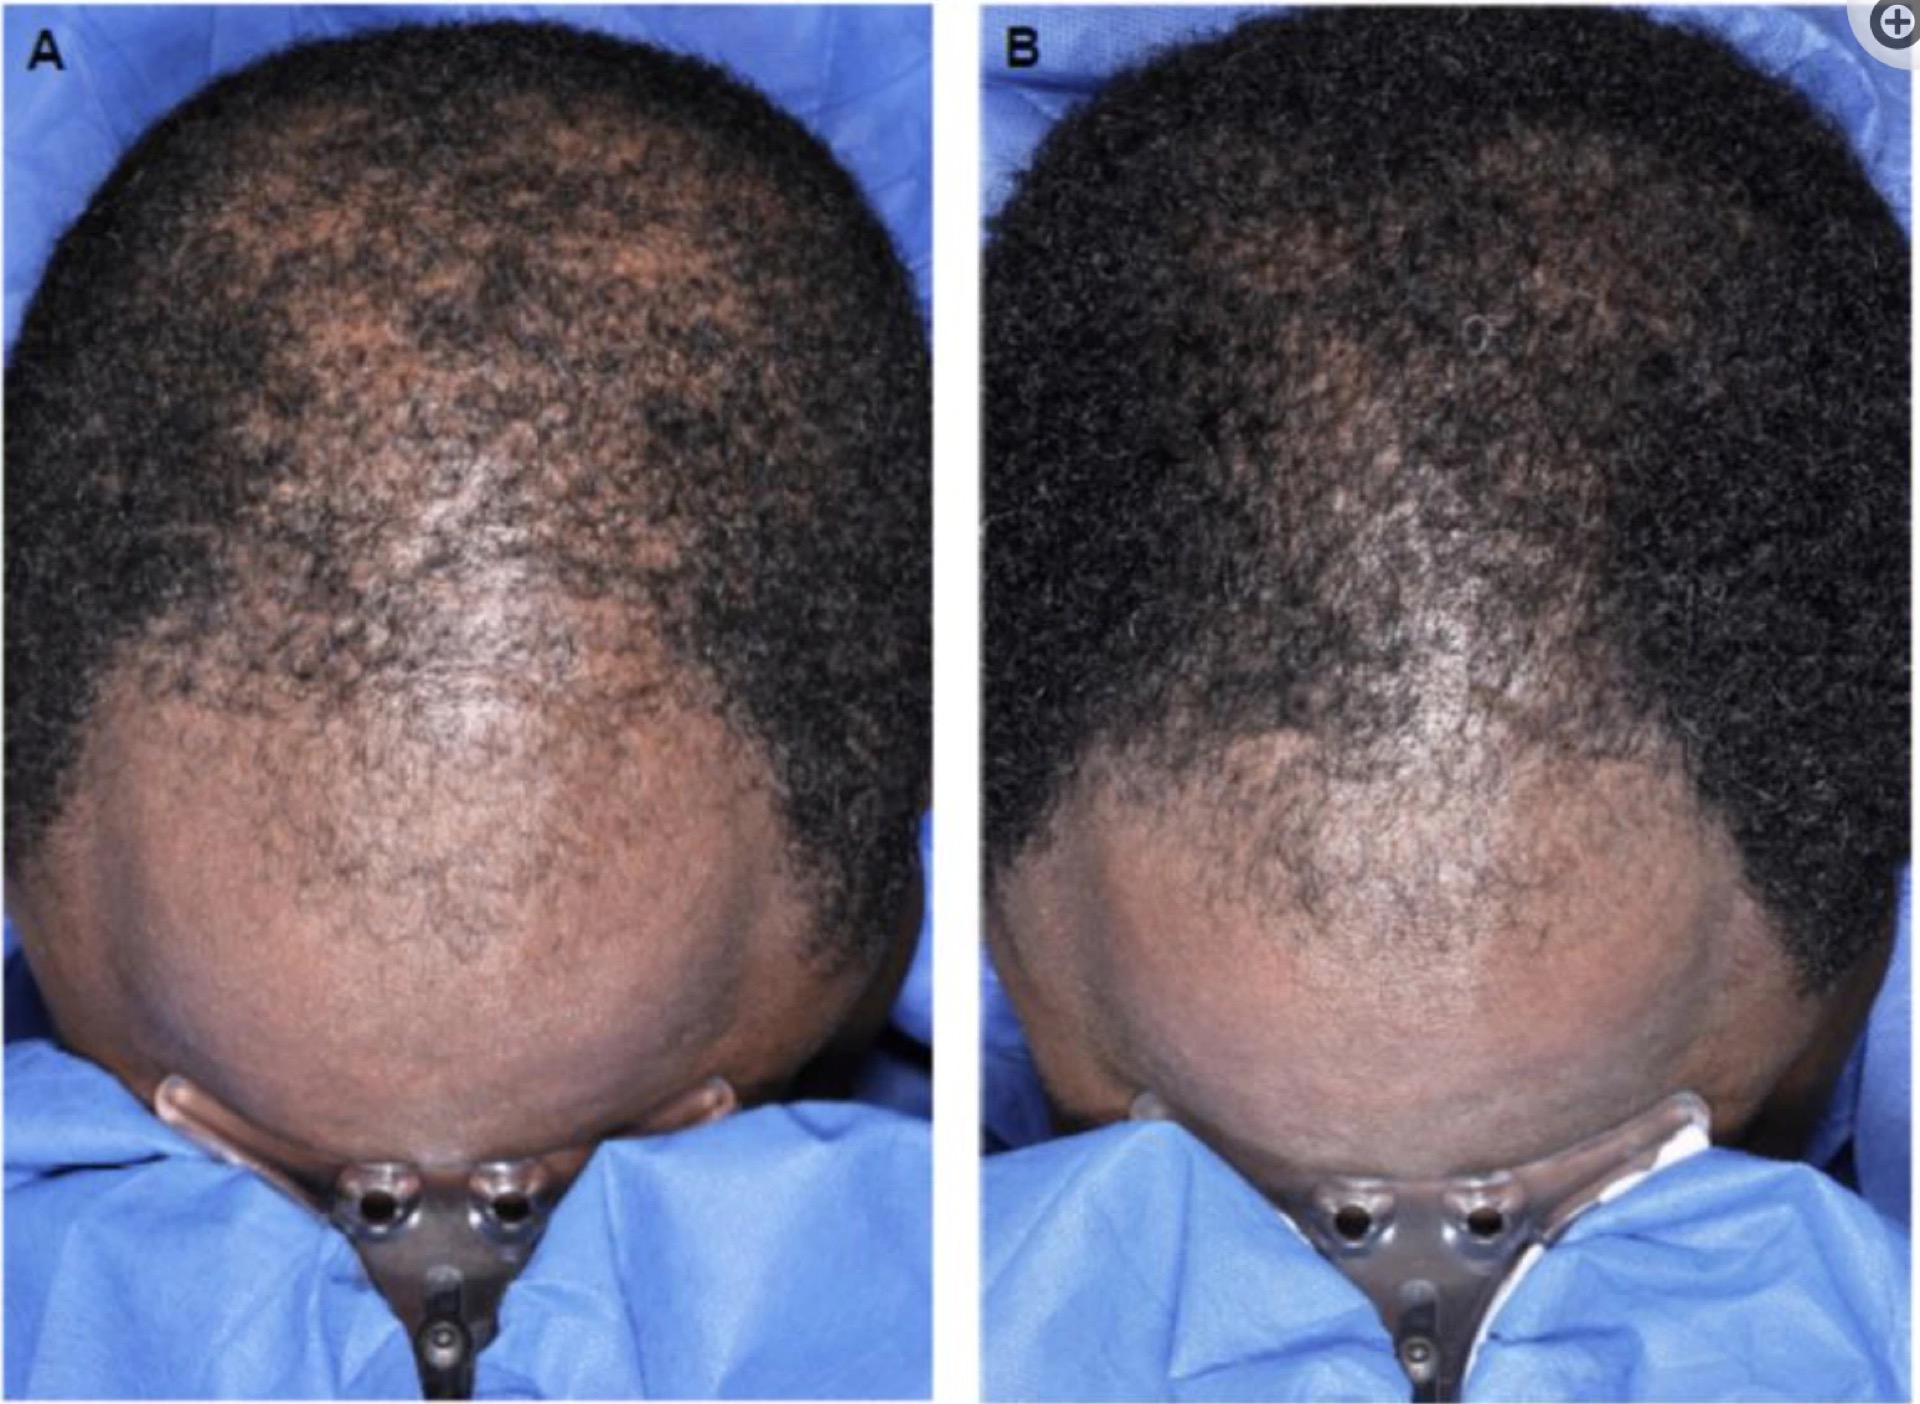 Before and after eight weeks of using 5% Minoxidil foam twice a day